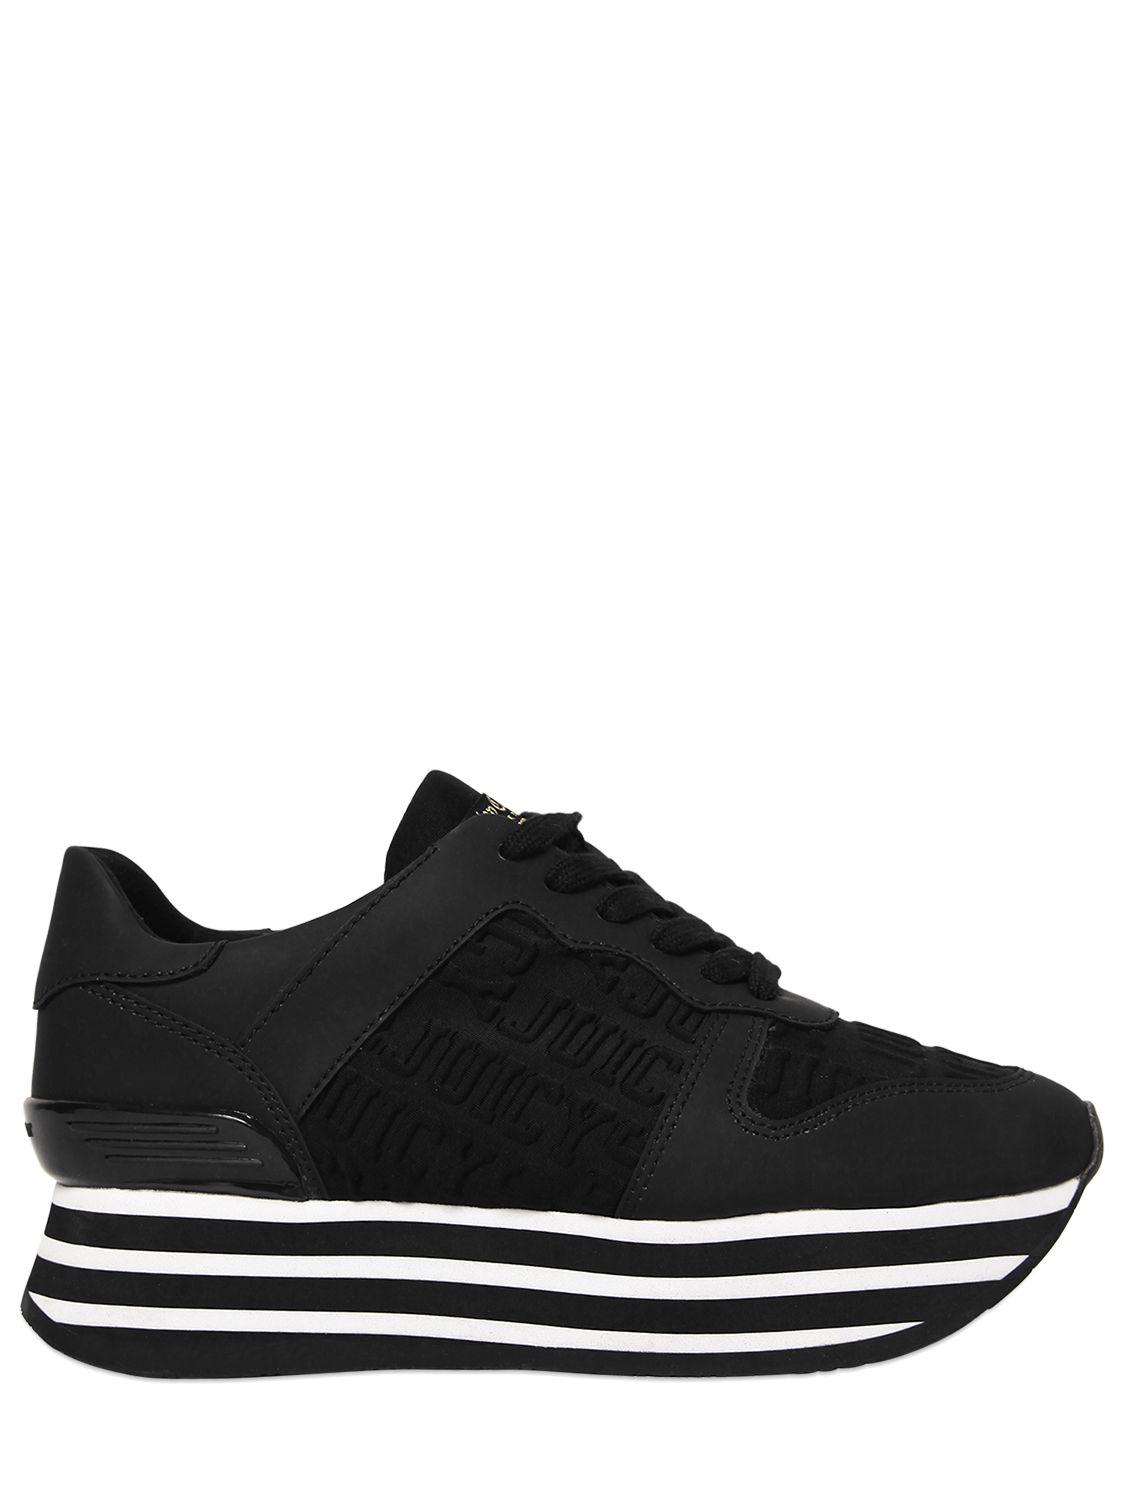 juicy couture black trainers